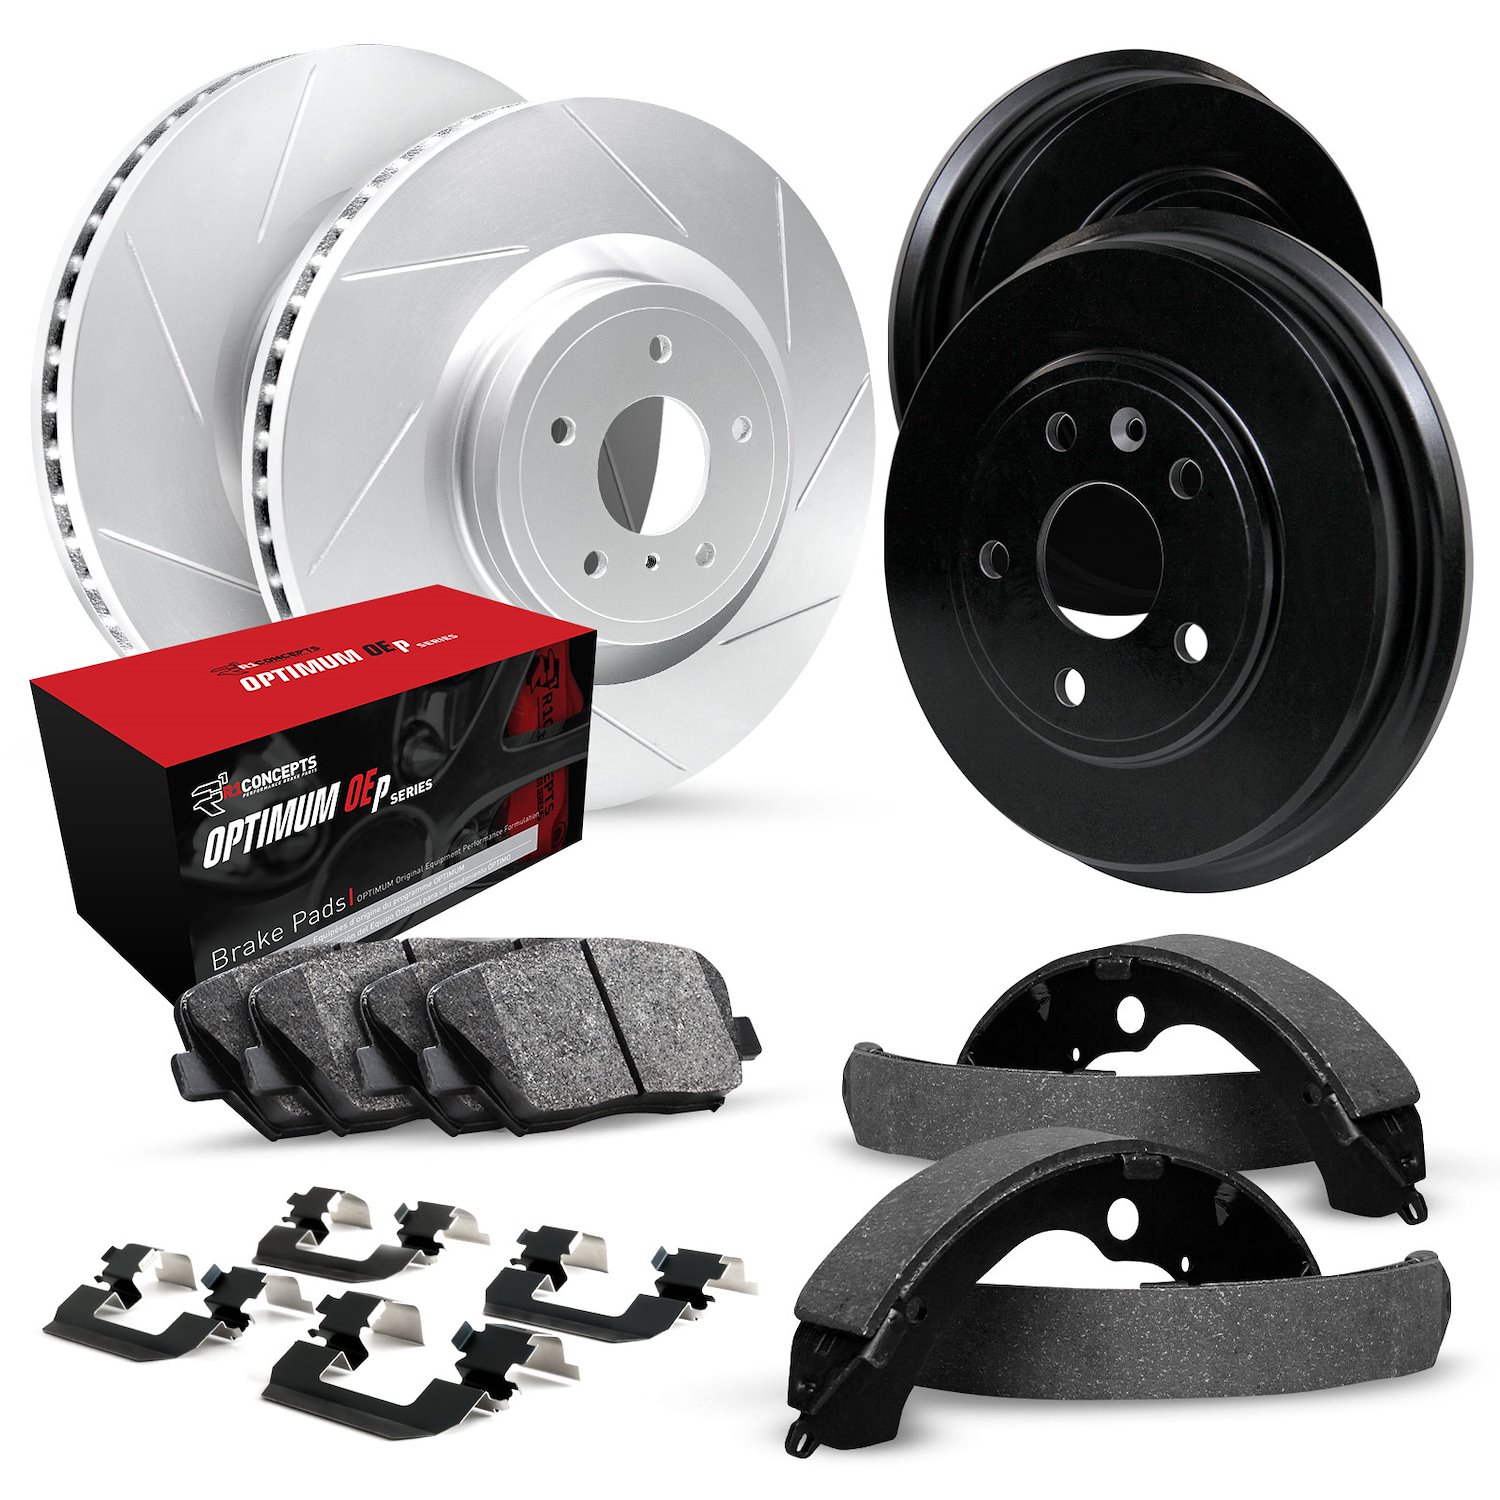 GEO-Carbon Slotted Brake Rotor & Drum Set w/Optimum OE Pads, Shoes, & Hardware, 1974-1975 GM, Position: Front & Rear